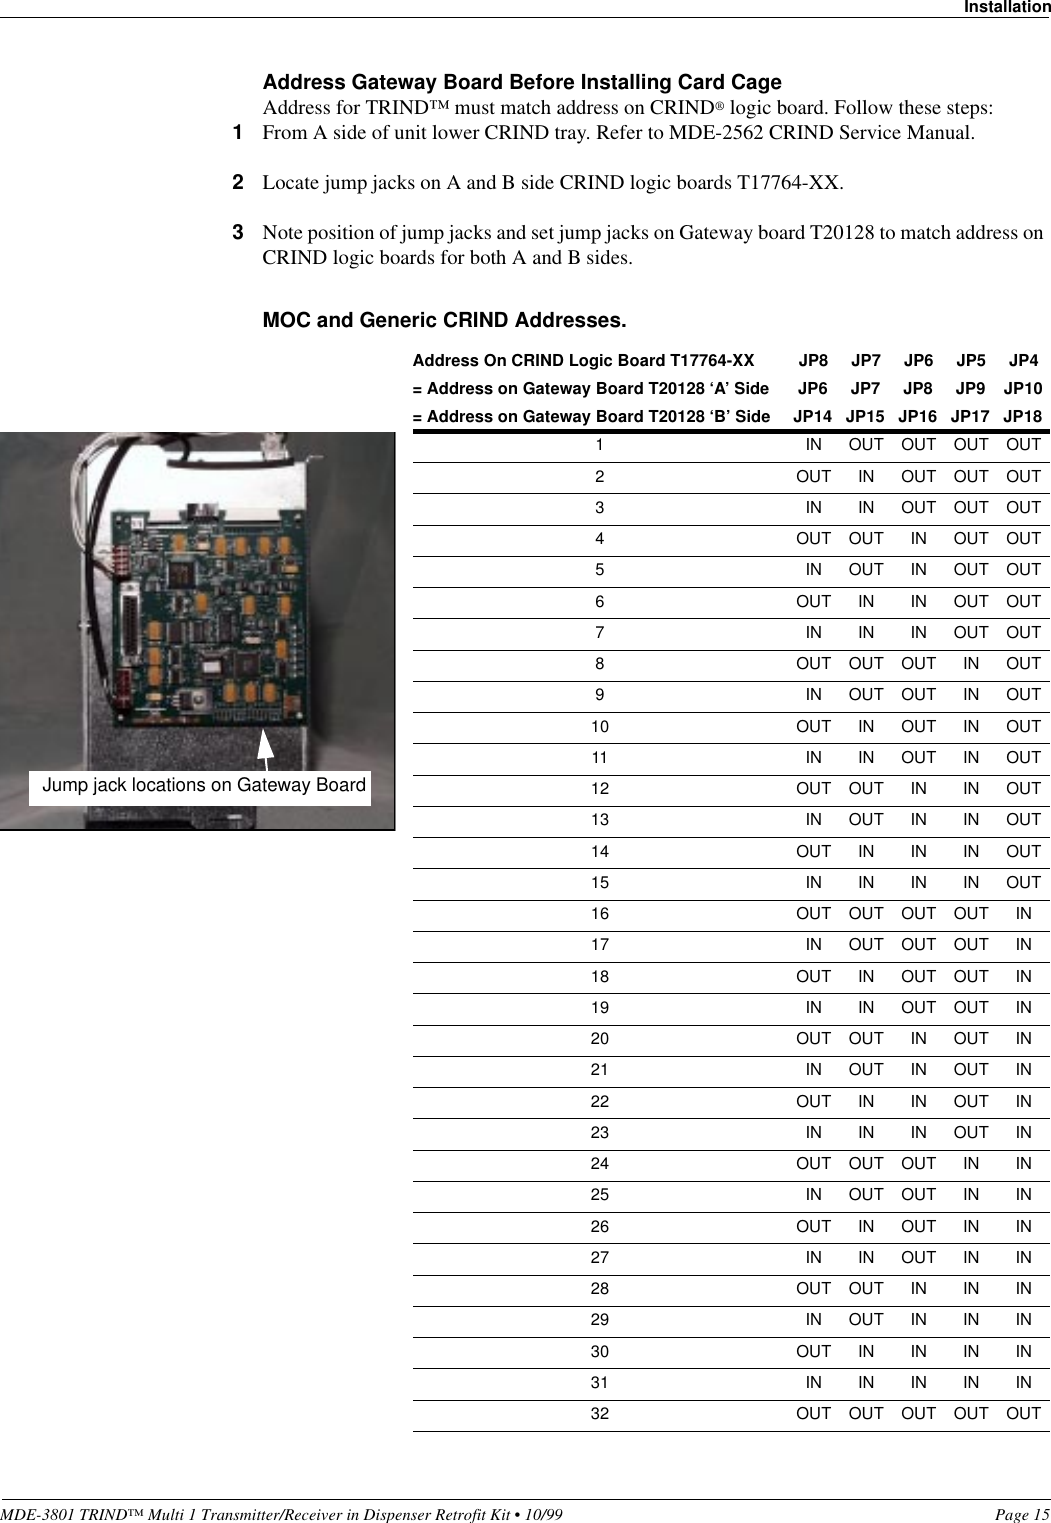 MDE-3801 TRIND™ Multi 1 Transmitter/Receiver in Dispenser Retrofit Kit • 10/99 Page 15InstallationAddress Gateway Board Before Installing Card CageAddress for TRIND™ must match address on CRIND® logic board. Follow these steps:1From A side of unit lower CRIND tray. Refer to MDE-2562 CRIND Service Manual.2Locate jump jacks on A and B side CRIND logic boards T17764-XX.3Note position of jump jacks and set jump jacks on Gateway board T20128 to match address on CRIND logic boards for both A and B sides.MOC and Generic CRIND Addresses. Address On CRIND Logic Board T17764-XX JP8 JP7 JP6 JP5 JP4= Address on Gateway Board T20128 ‘A’ Side JP6 JP7 JP8 JP9 JP10= Address on Gateway Board T20128 ‘B’ Side JP14 JP15 JP16 JP17 JP181 IN OUT OUT OUT OUT2 OUT IN OUT OUT OUT3 IN IN OUT OUT OUT4 OUT OUT IN OUT OUT5 IN OUT IN OUT OUT6 OUT IN IN OUT OUT7 INININOUTOUT8 OUT OUT OUT IN OUT9 INOUTOUTINOUT10 OUT IN OUT IN OUT11 IN IN OUT IN OUT12 OUT OUT IN IN OUT13 IN OUT IN IN OUT14 OUTINININOUT15 IN IN IN IN OUT16 OUT OUT OUT OUT IN17 IN OUT OUT OUT IN18 OUT IN OUT OUT IN19 IN IN OUT OUT IN20 OUT OUT IN OUT IN21 IN OUT IN OUT IN22 OUT IN IN OUT IN23 IN IN IN OUT IN24 OUT OUT OUT IN IN25 IN OUT OUT IN IN26 OUT IN OUT IN IN27 IN IN OUT IN IN28 OUT OUT IN IN IN29 IN OUT IN IN IN30 OUTININININ31 IN IN IN IN IN32 OUT OUT OUT OUT OUTJump jack locations on Gateway Board